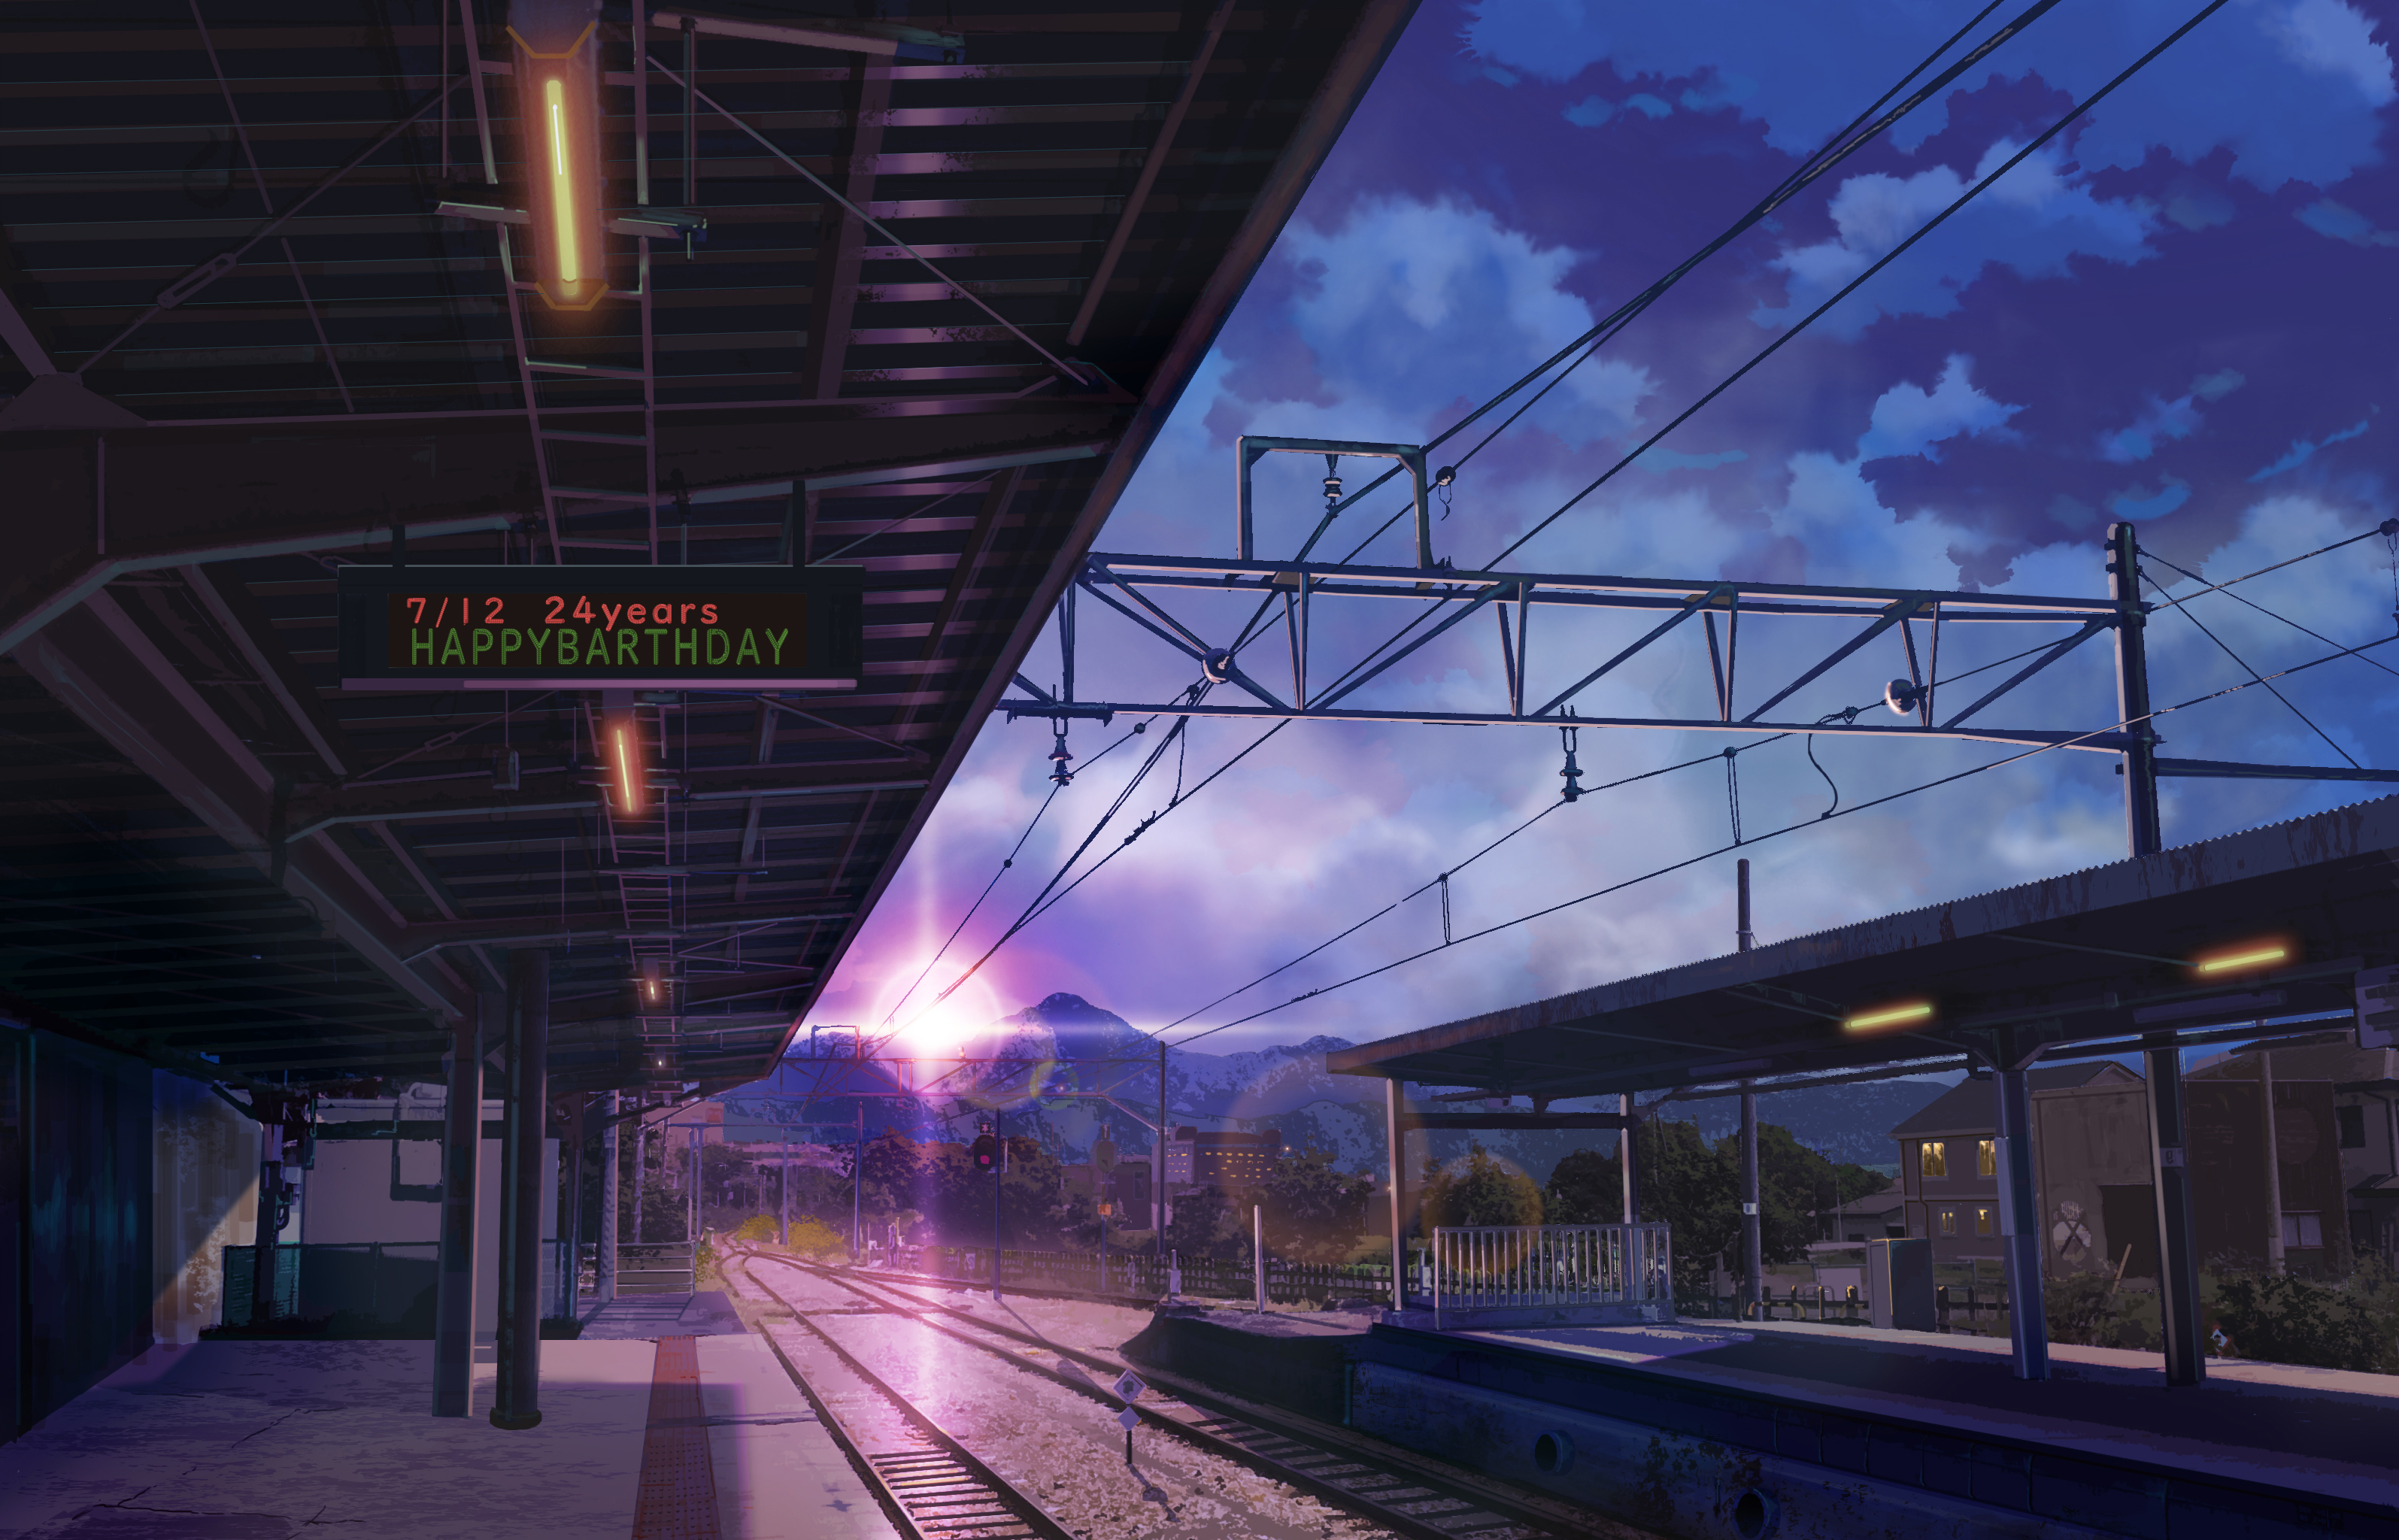 Anime Style Render Train by mclelun on DeviantArt